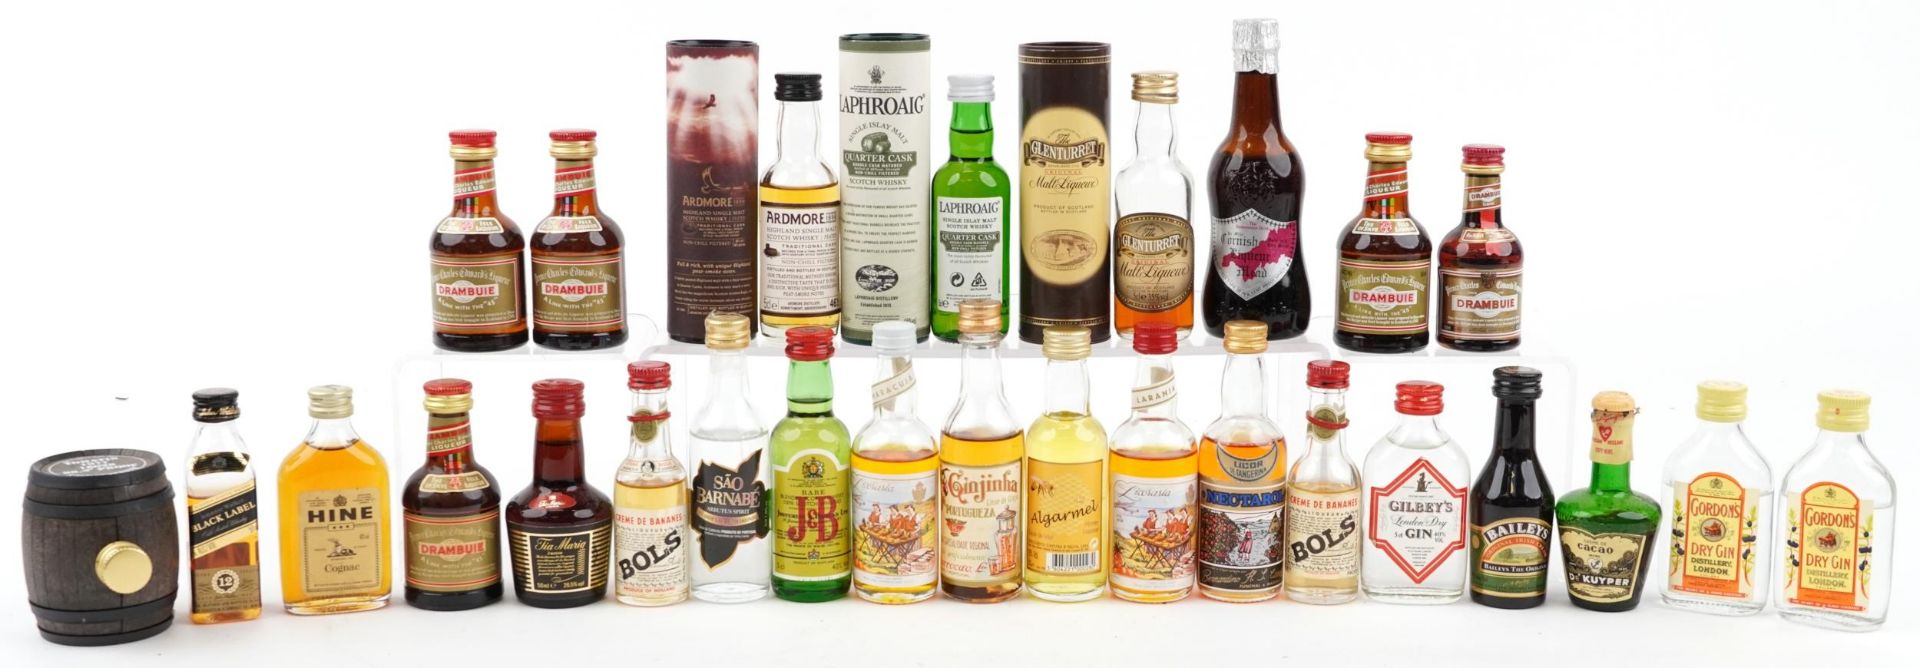 Alcohol miniatures including Laphroaig whisky, Gordons gin and Johnnie Walker Black Label whisky :